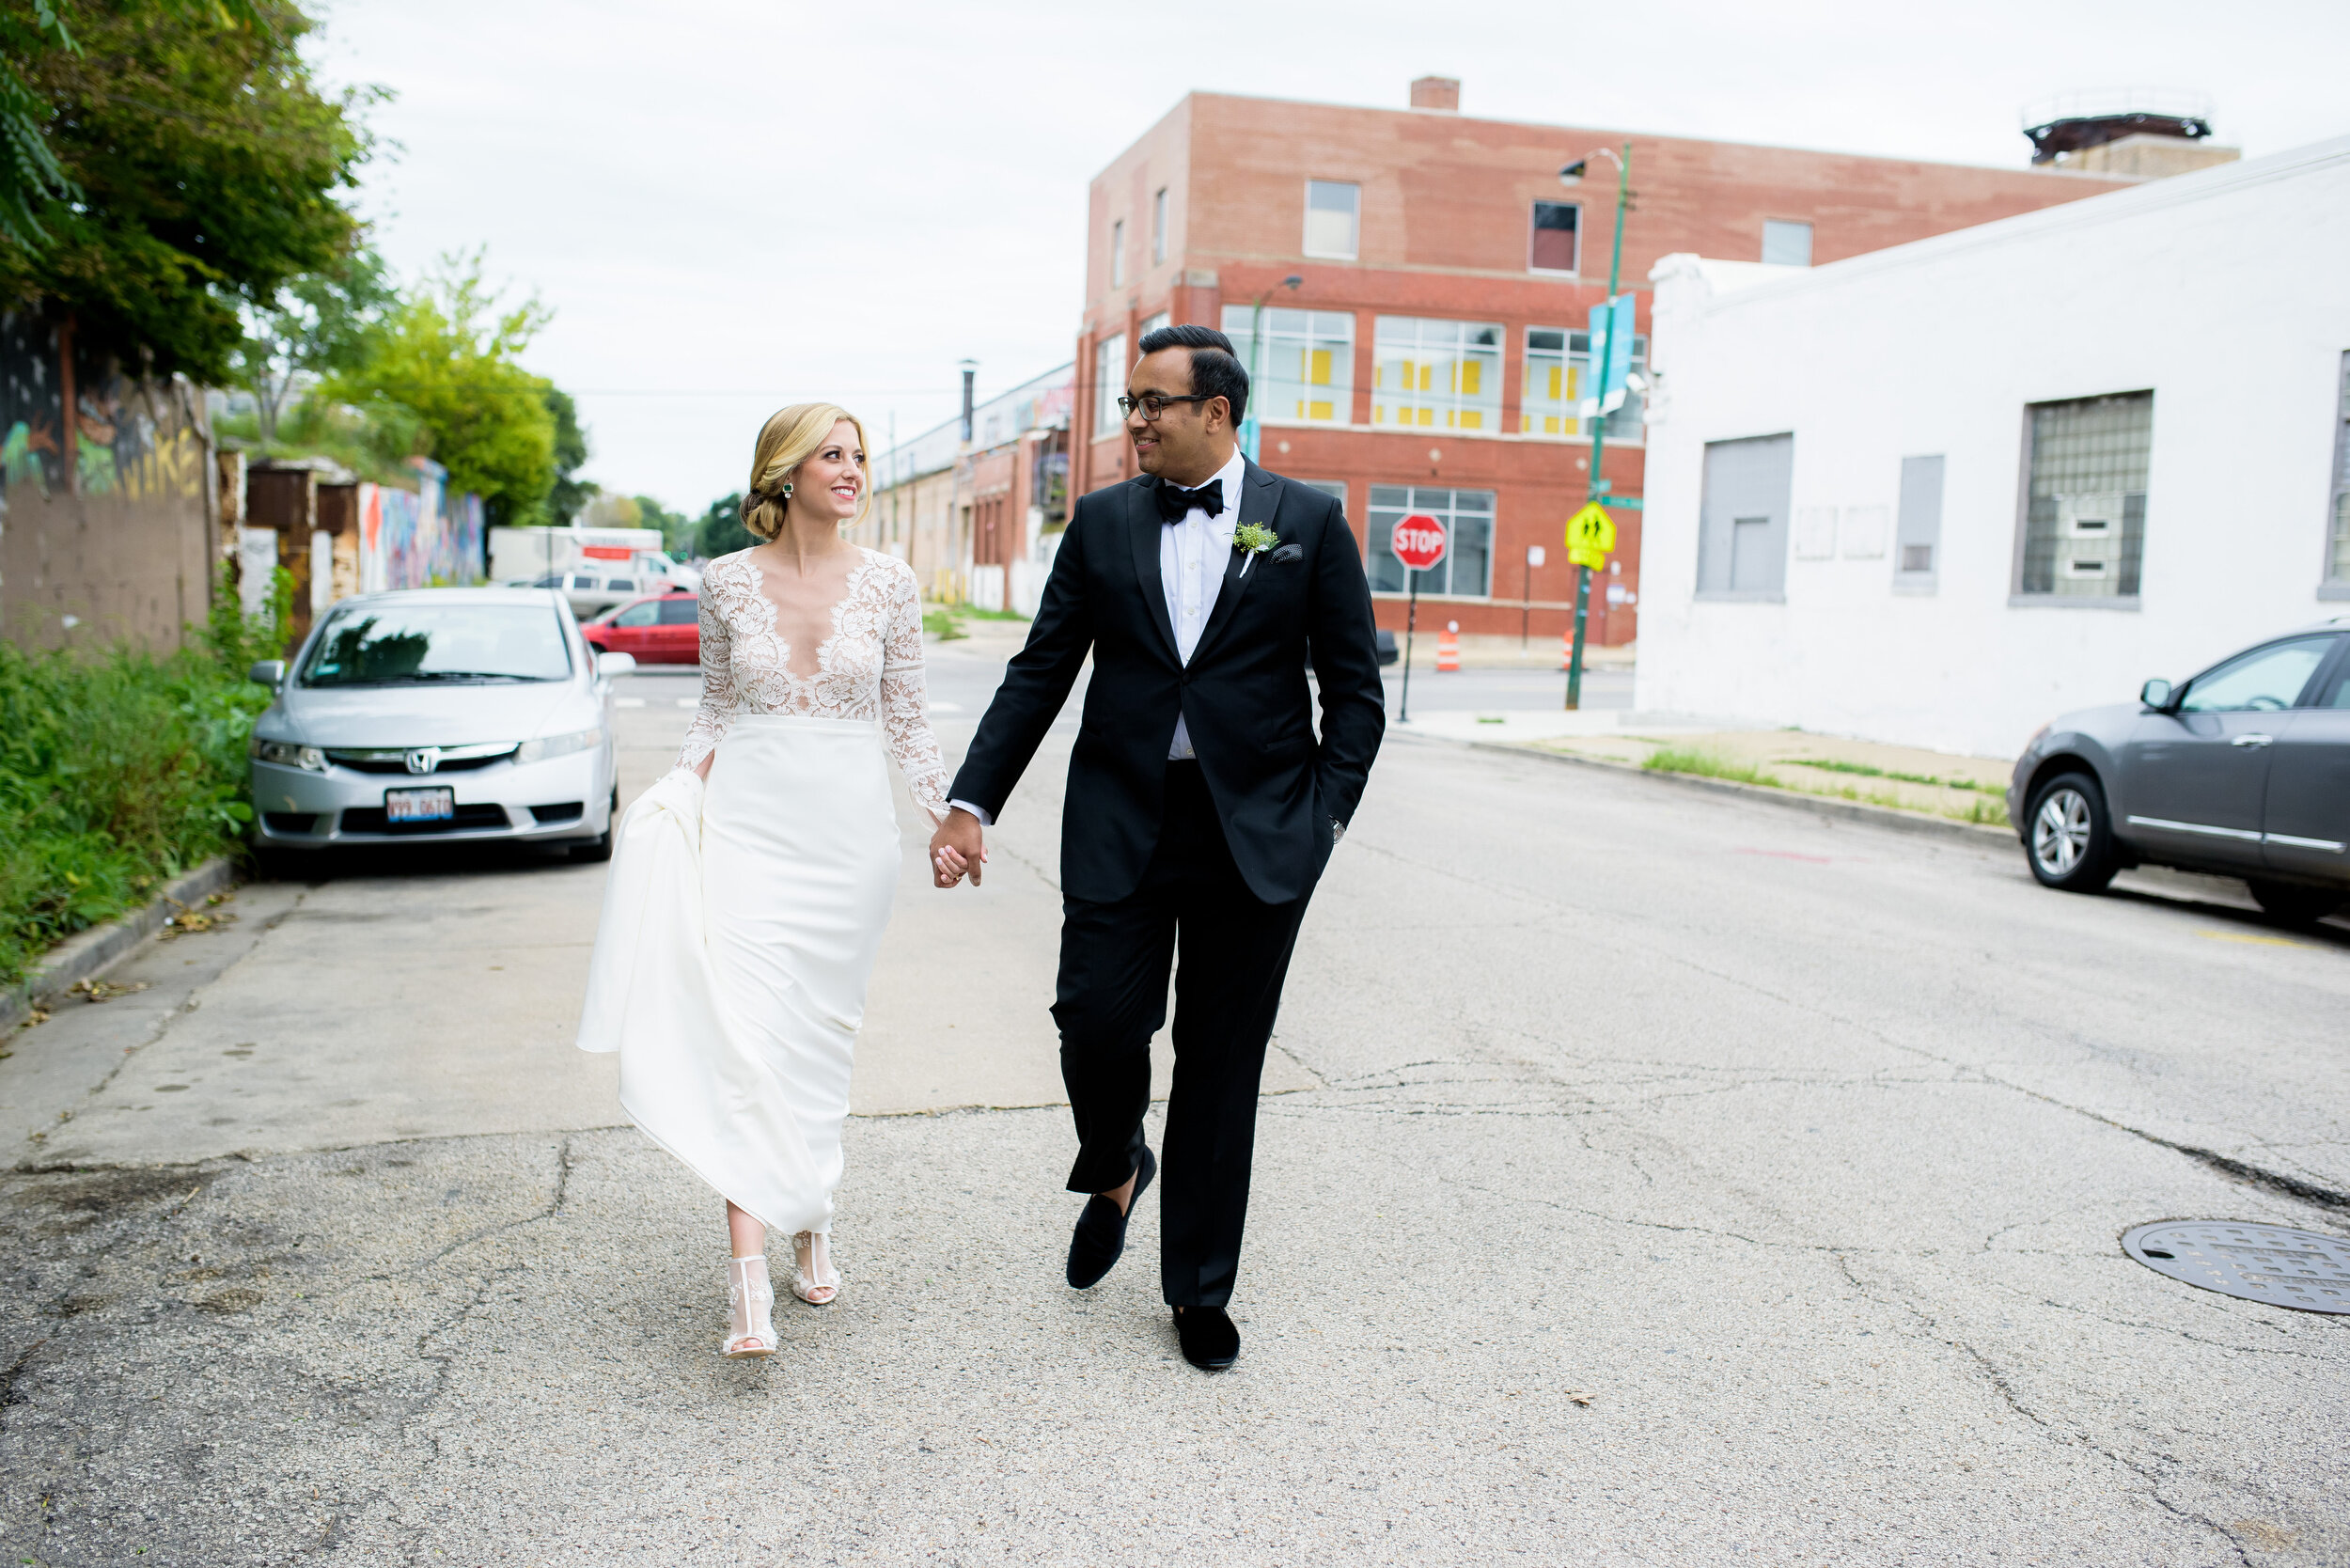 Candid wedding photo in Pilsen: Geraghty Chicago wedding photography captured by J. Brown Photography.